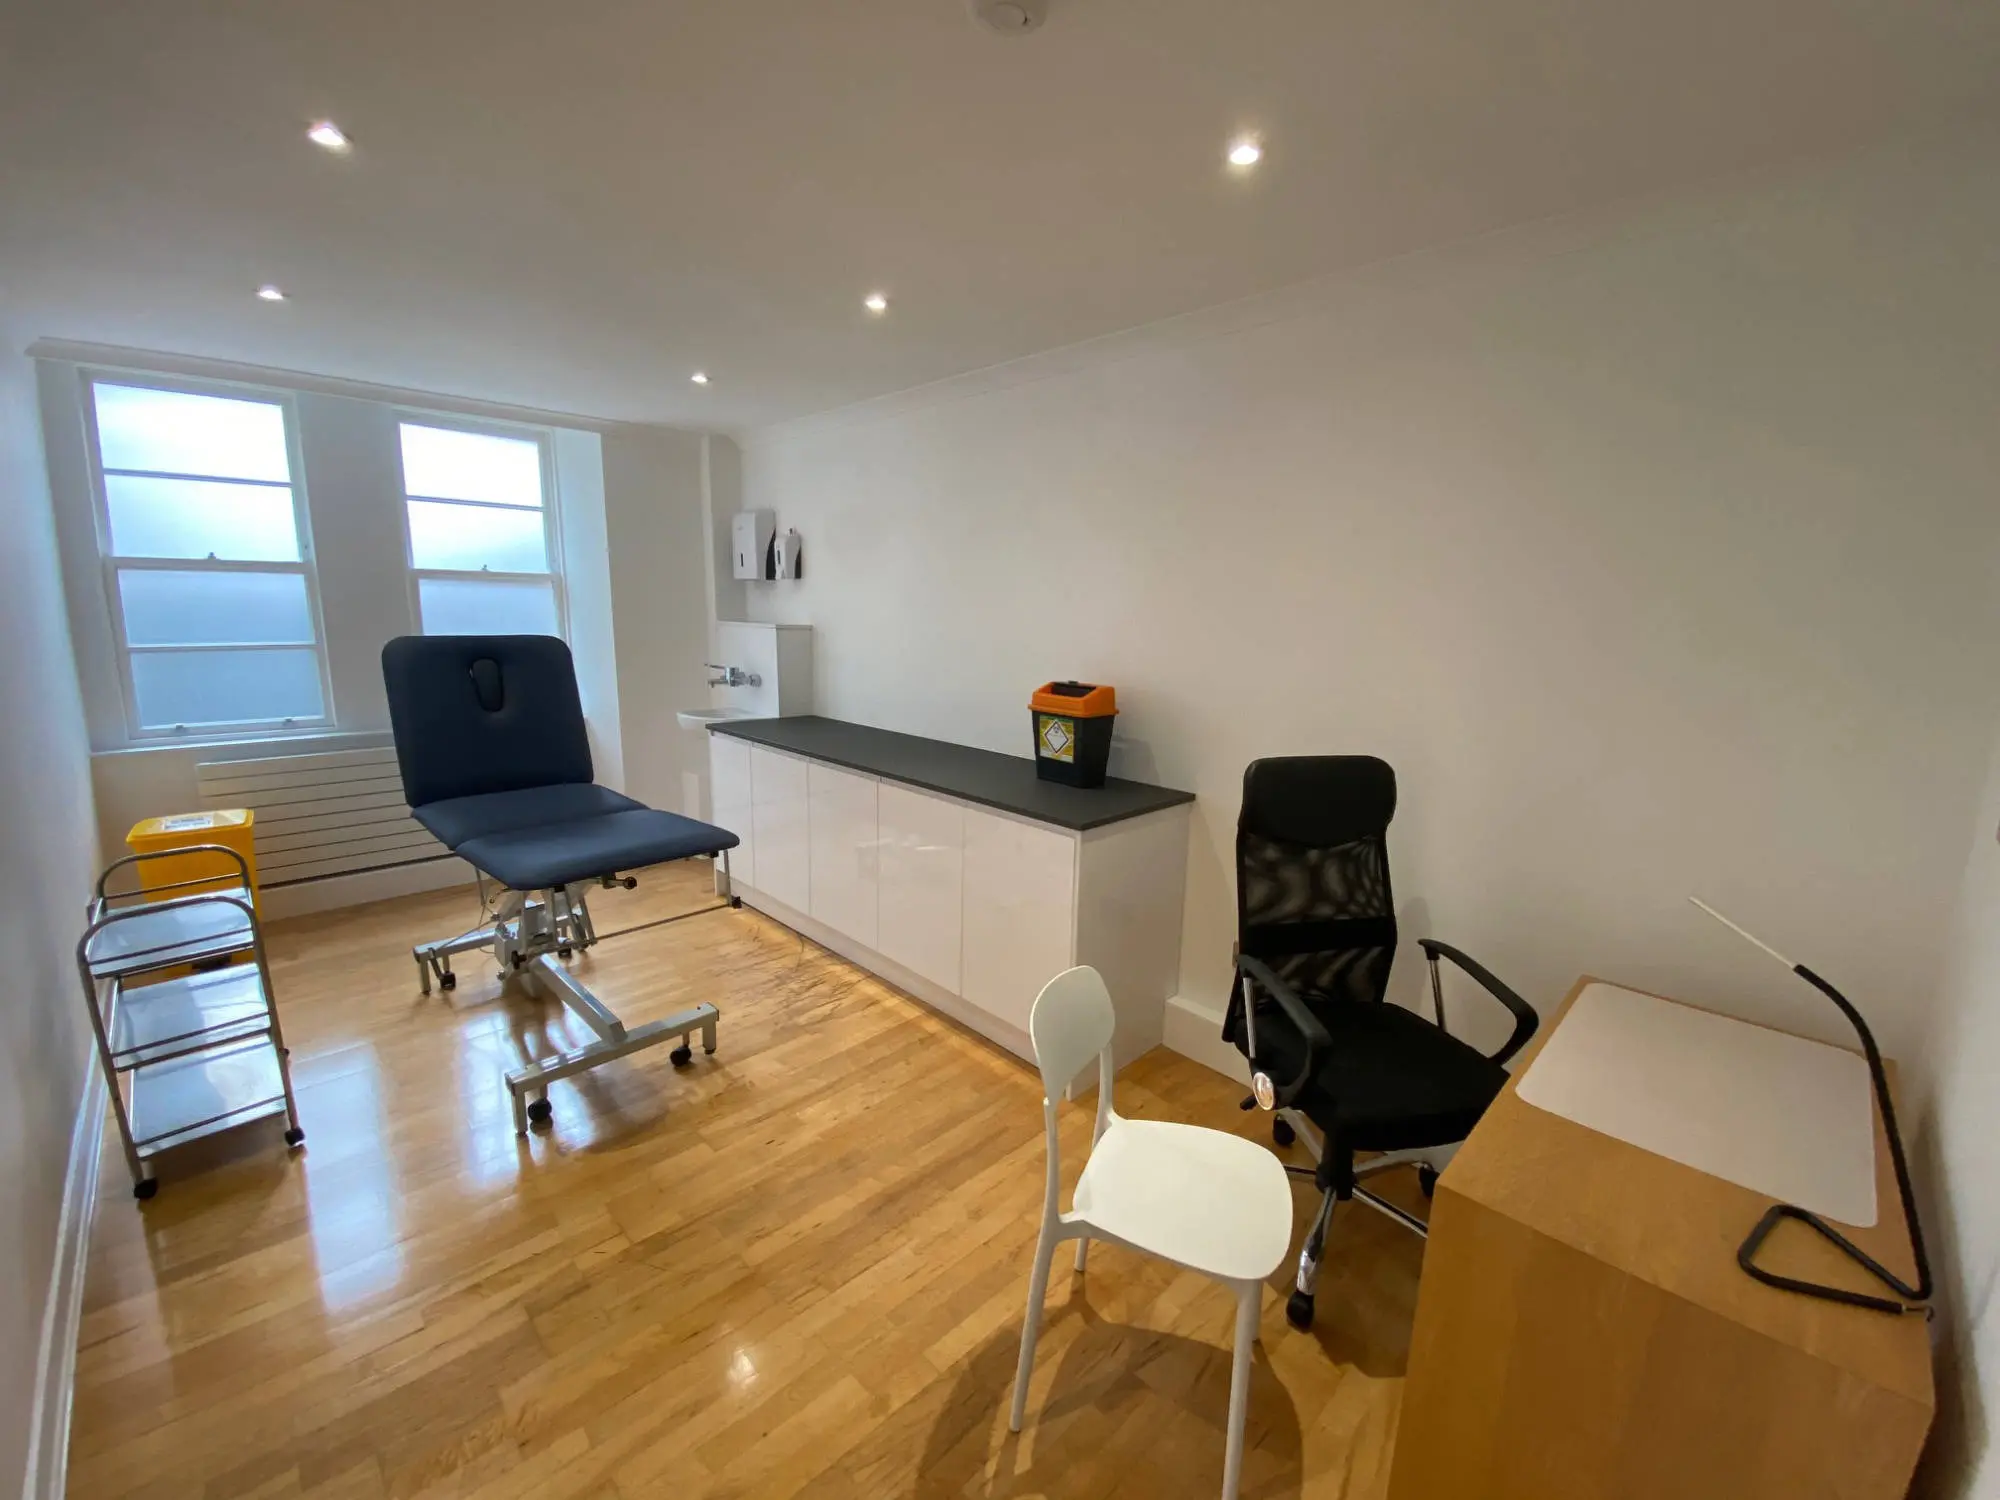 treatment room for rent in glasgow